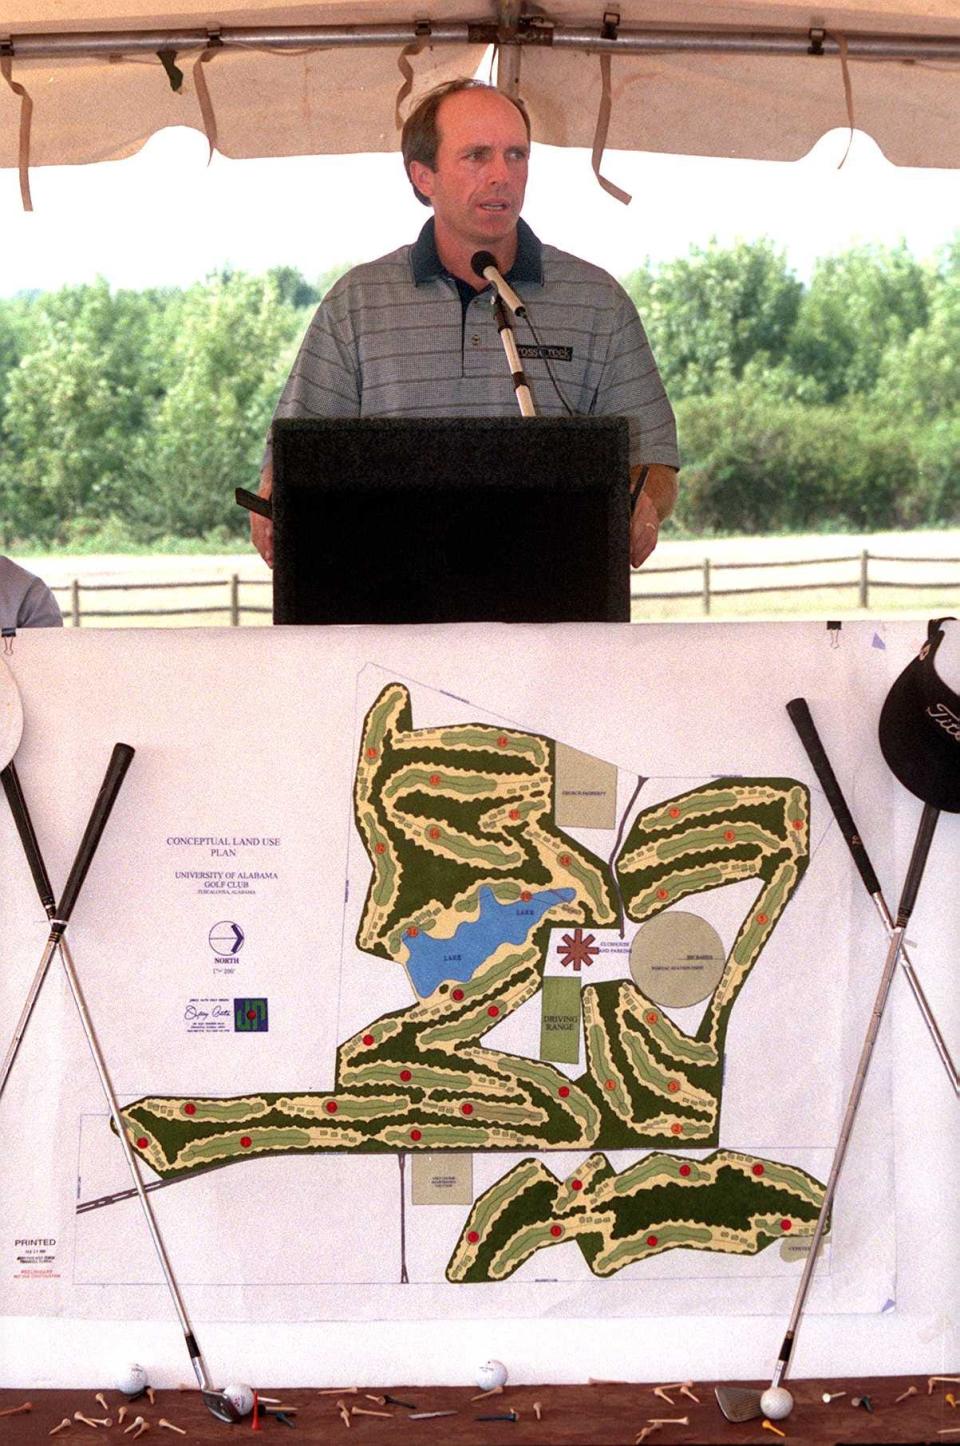 8-20-99--Northport, AL-- Jerry Pate of Jerry Pate Golf Design speaks the public and the media at the site of the future golf course that PARA will build at Sokol Park in Northport.  (Tuscaloosa News/Porfirio Solorzano)